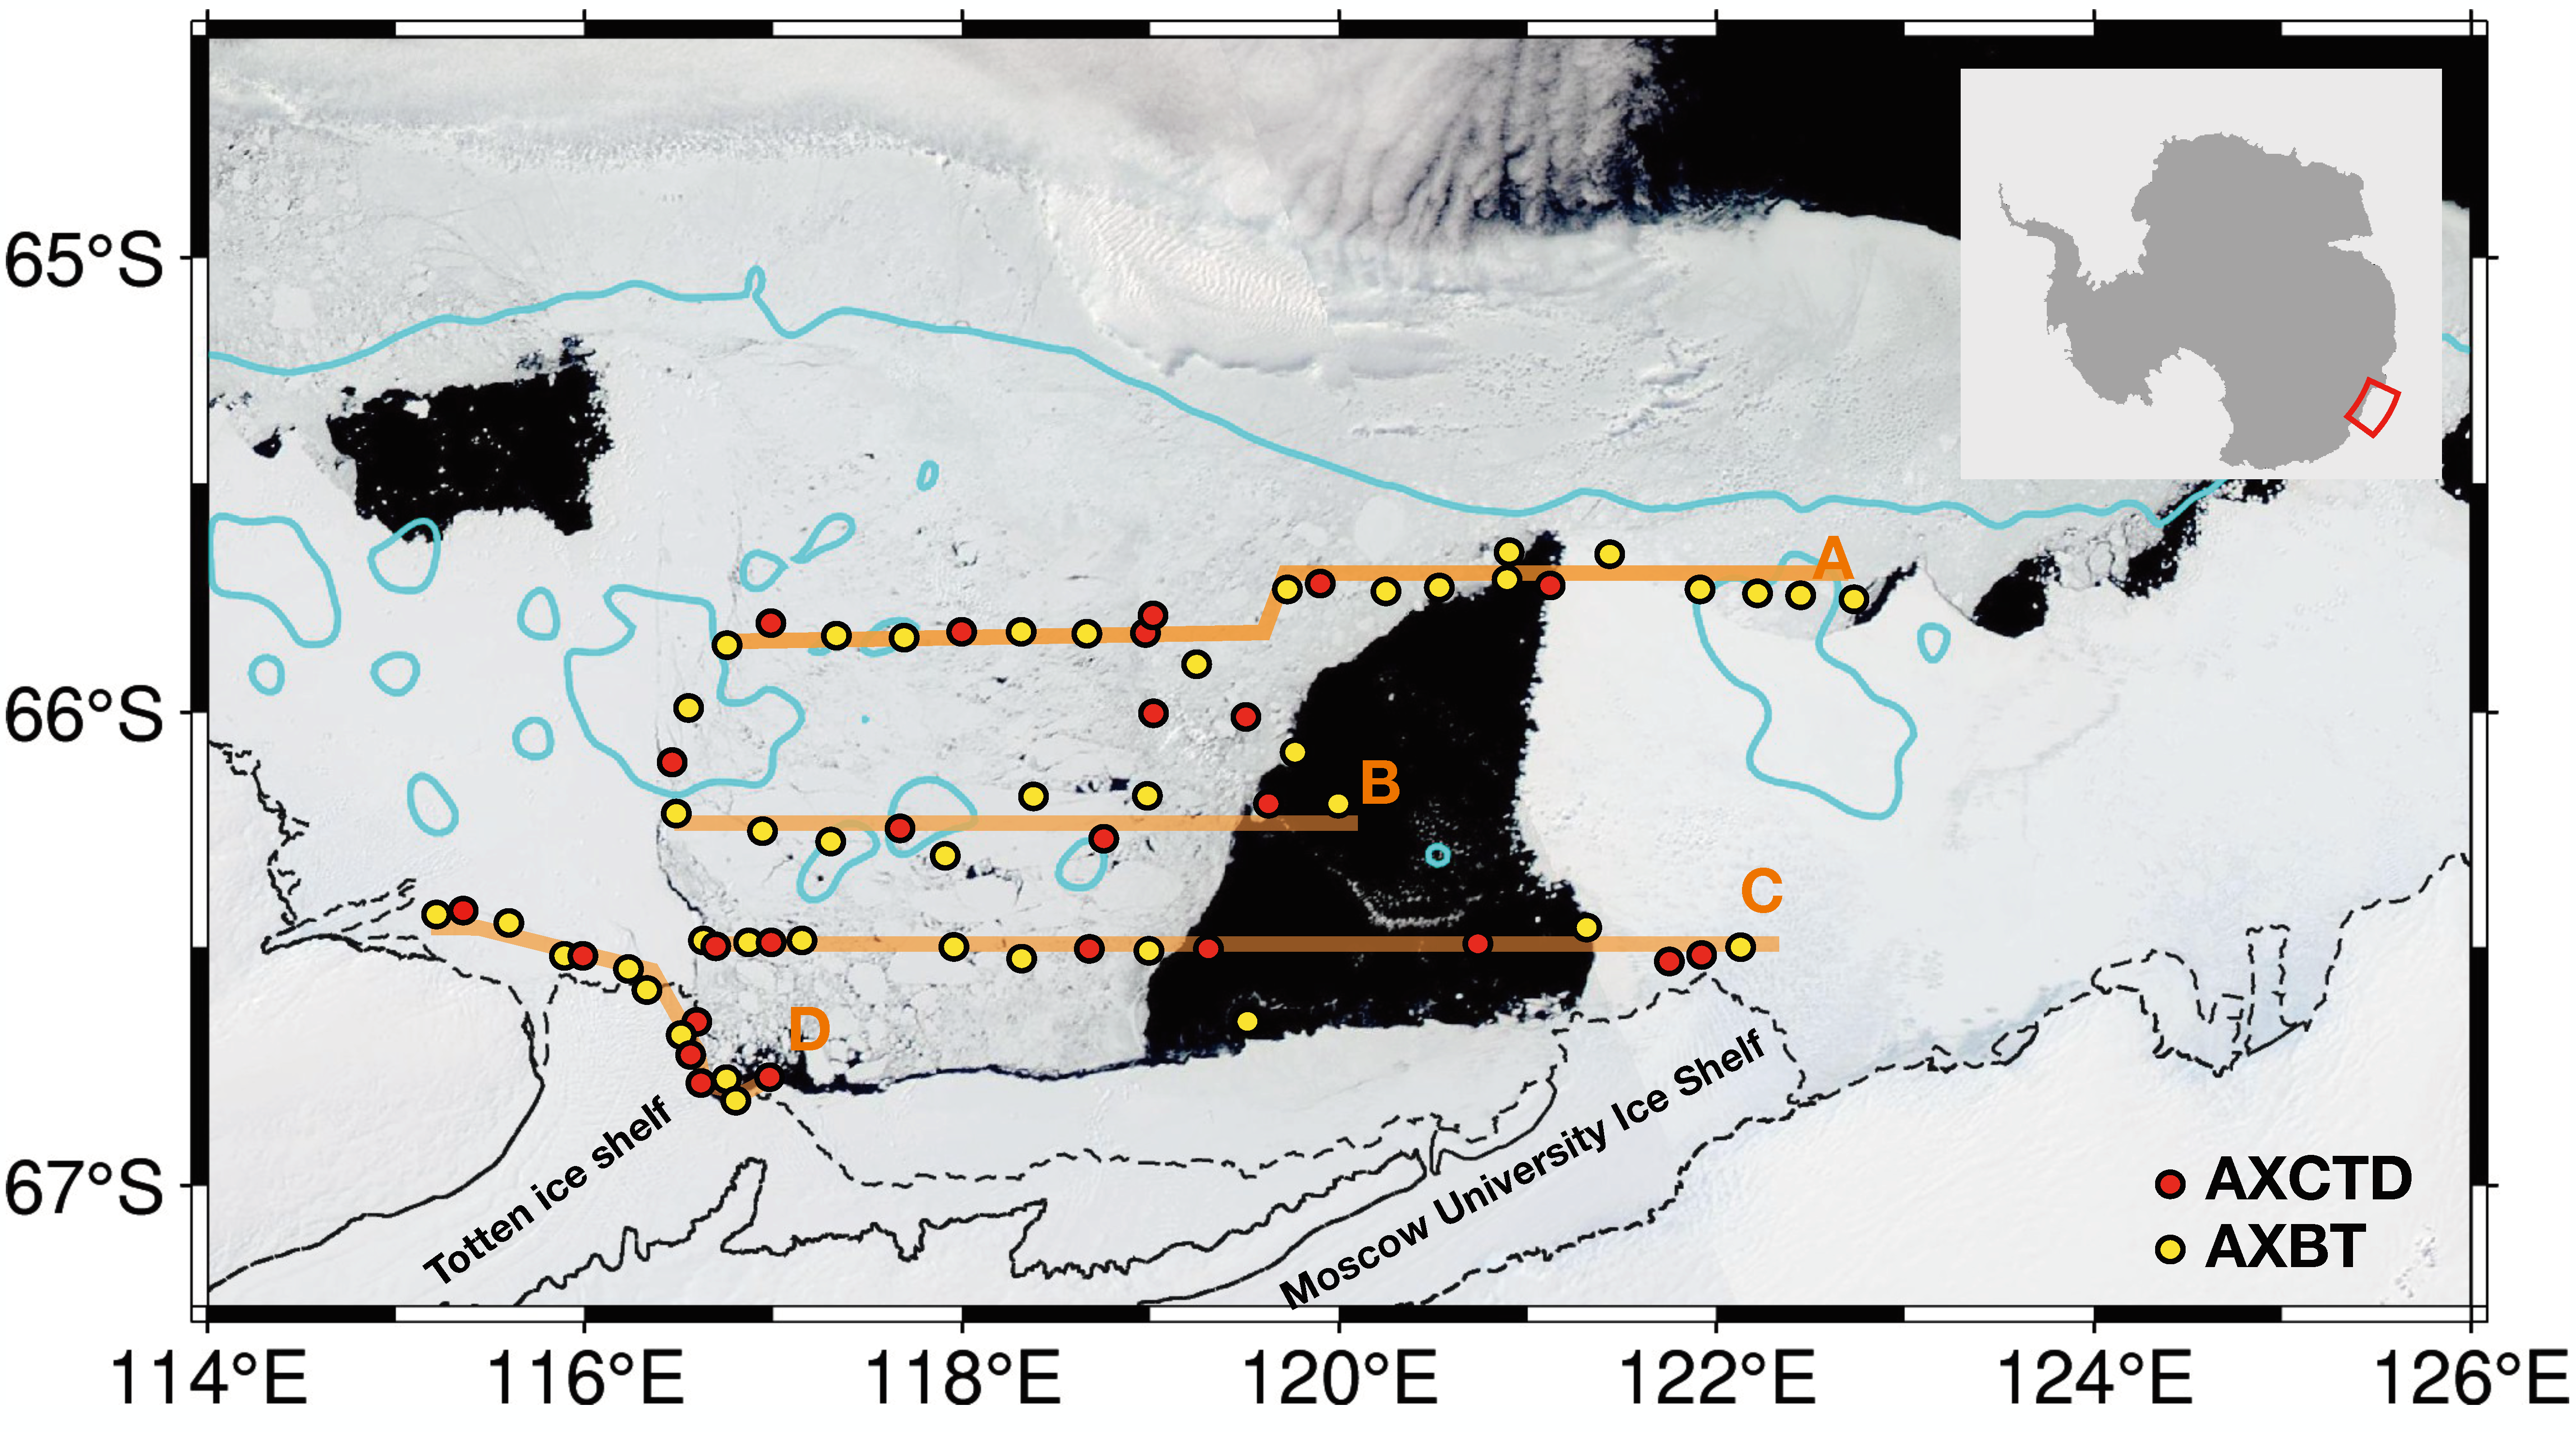 A satellite photo of the region surrounding the Totten Glacier, showing the Totten Ice Shelf and Moscow University Ice Shelf, with sampling paths (orange lines), sampling locations (yellow and red circles), and the 1000 m depth contour (cyan outlines). (Yoshihiro Nakayama, et al. Geophysical Research Letters. September 11, 2023)